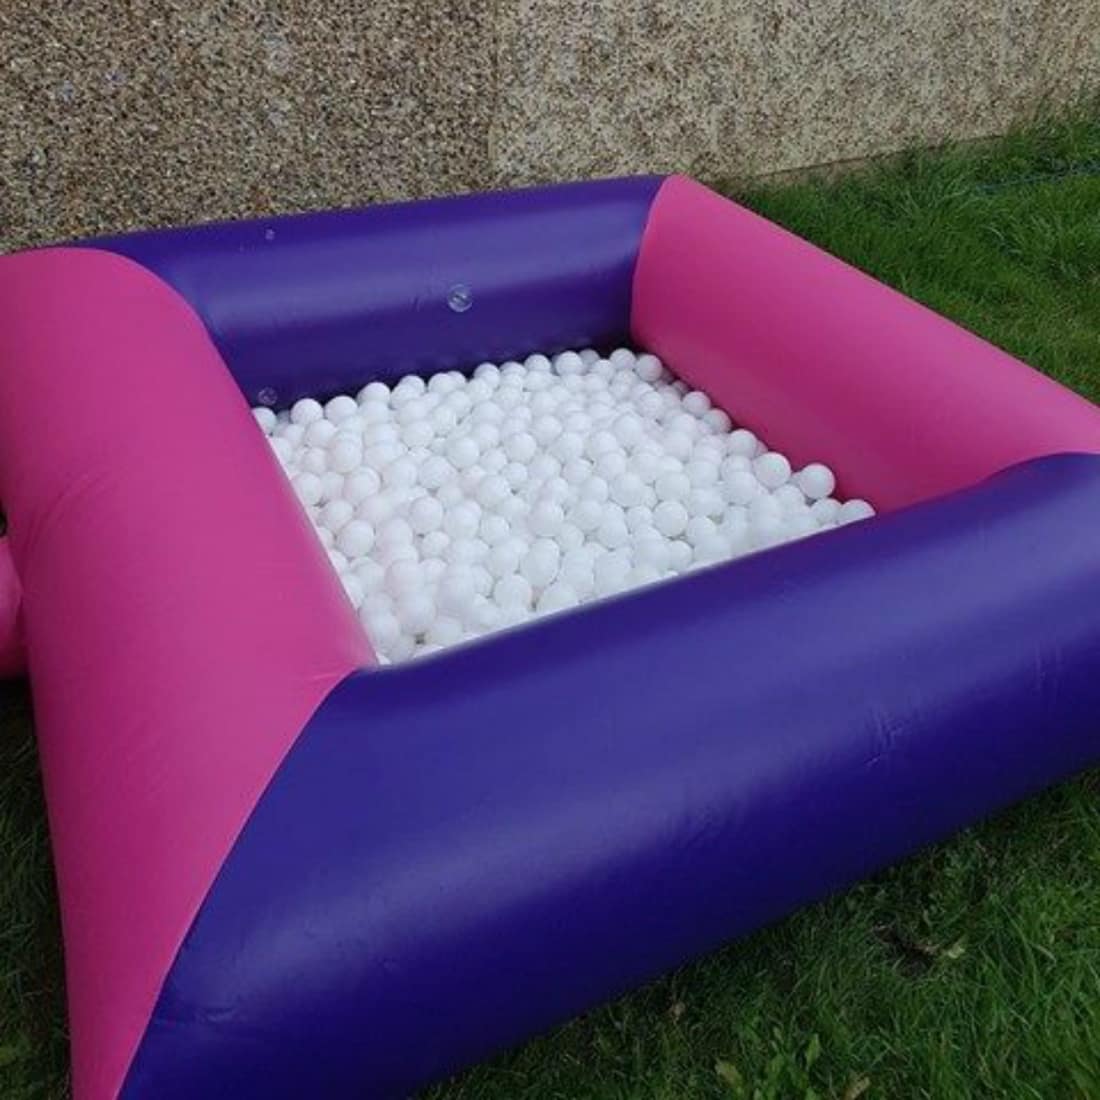 6ft x 6ft x 15in Ball pool/pond/pit with air jugglers 